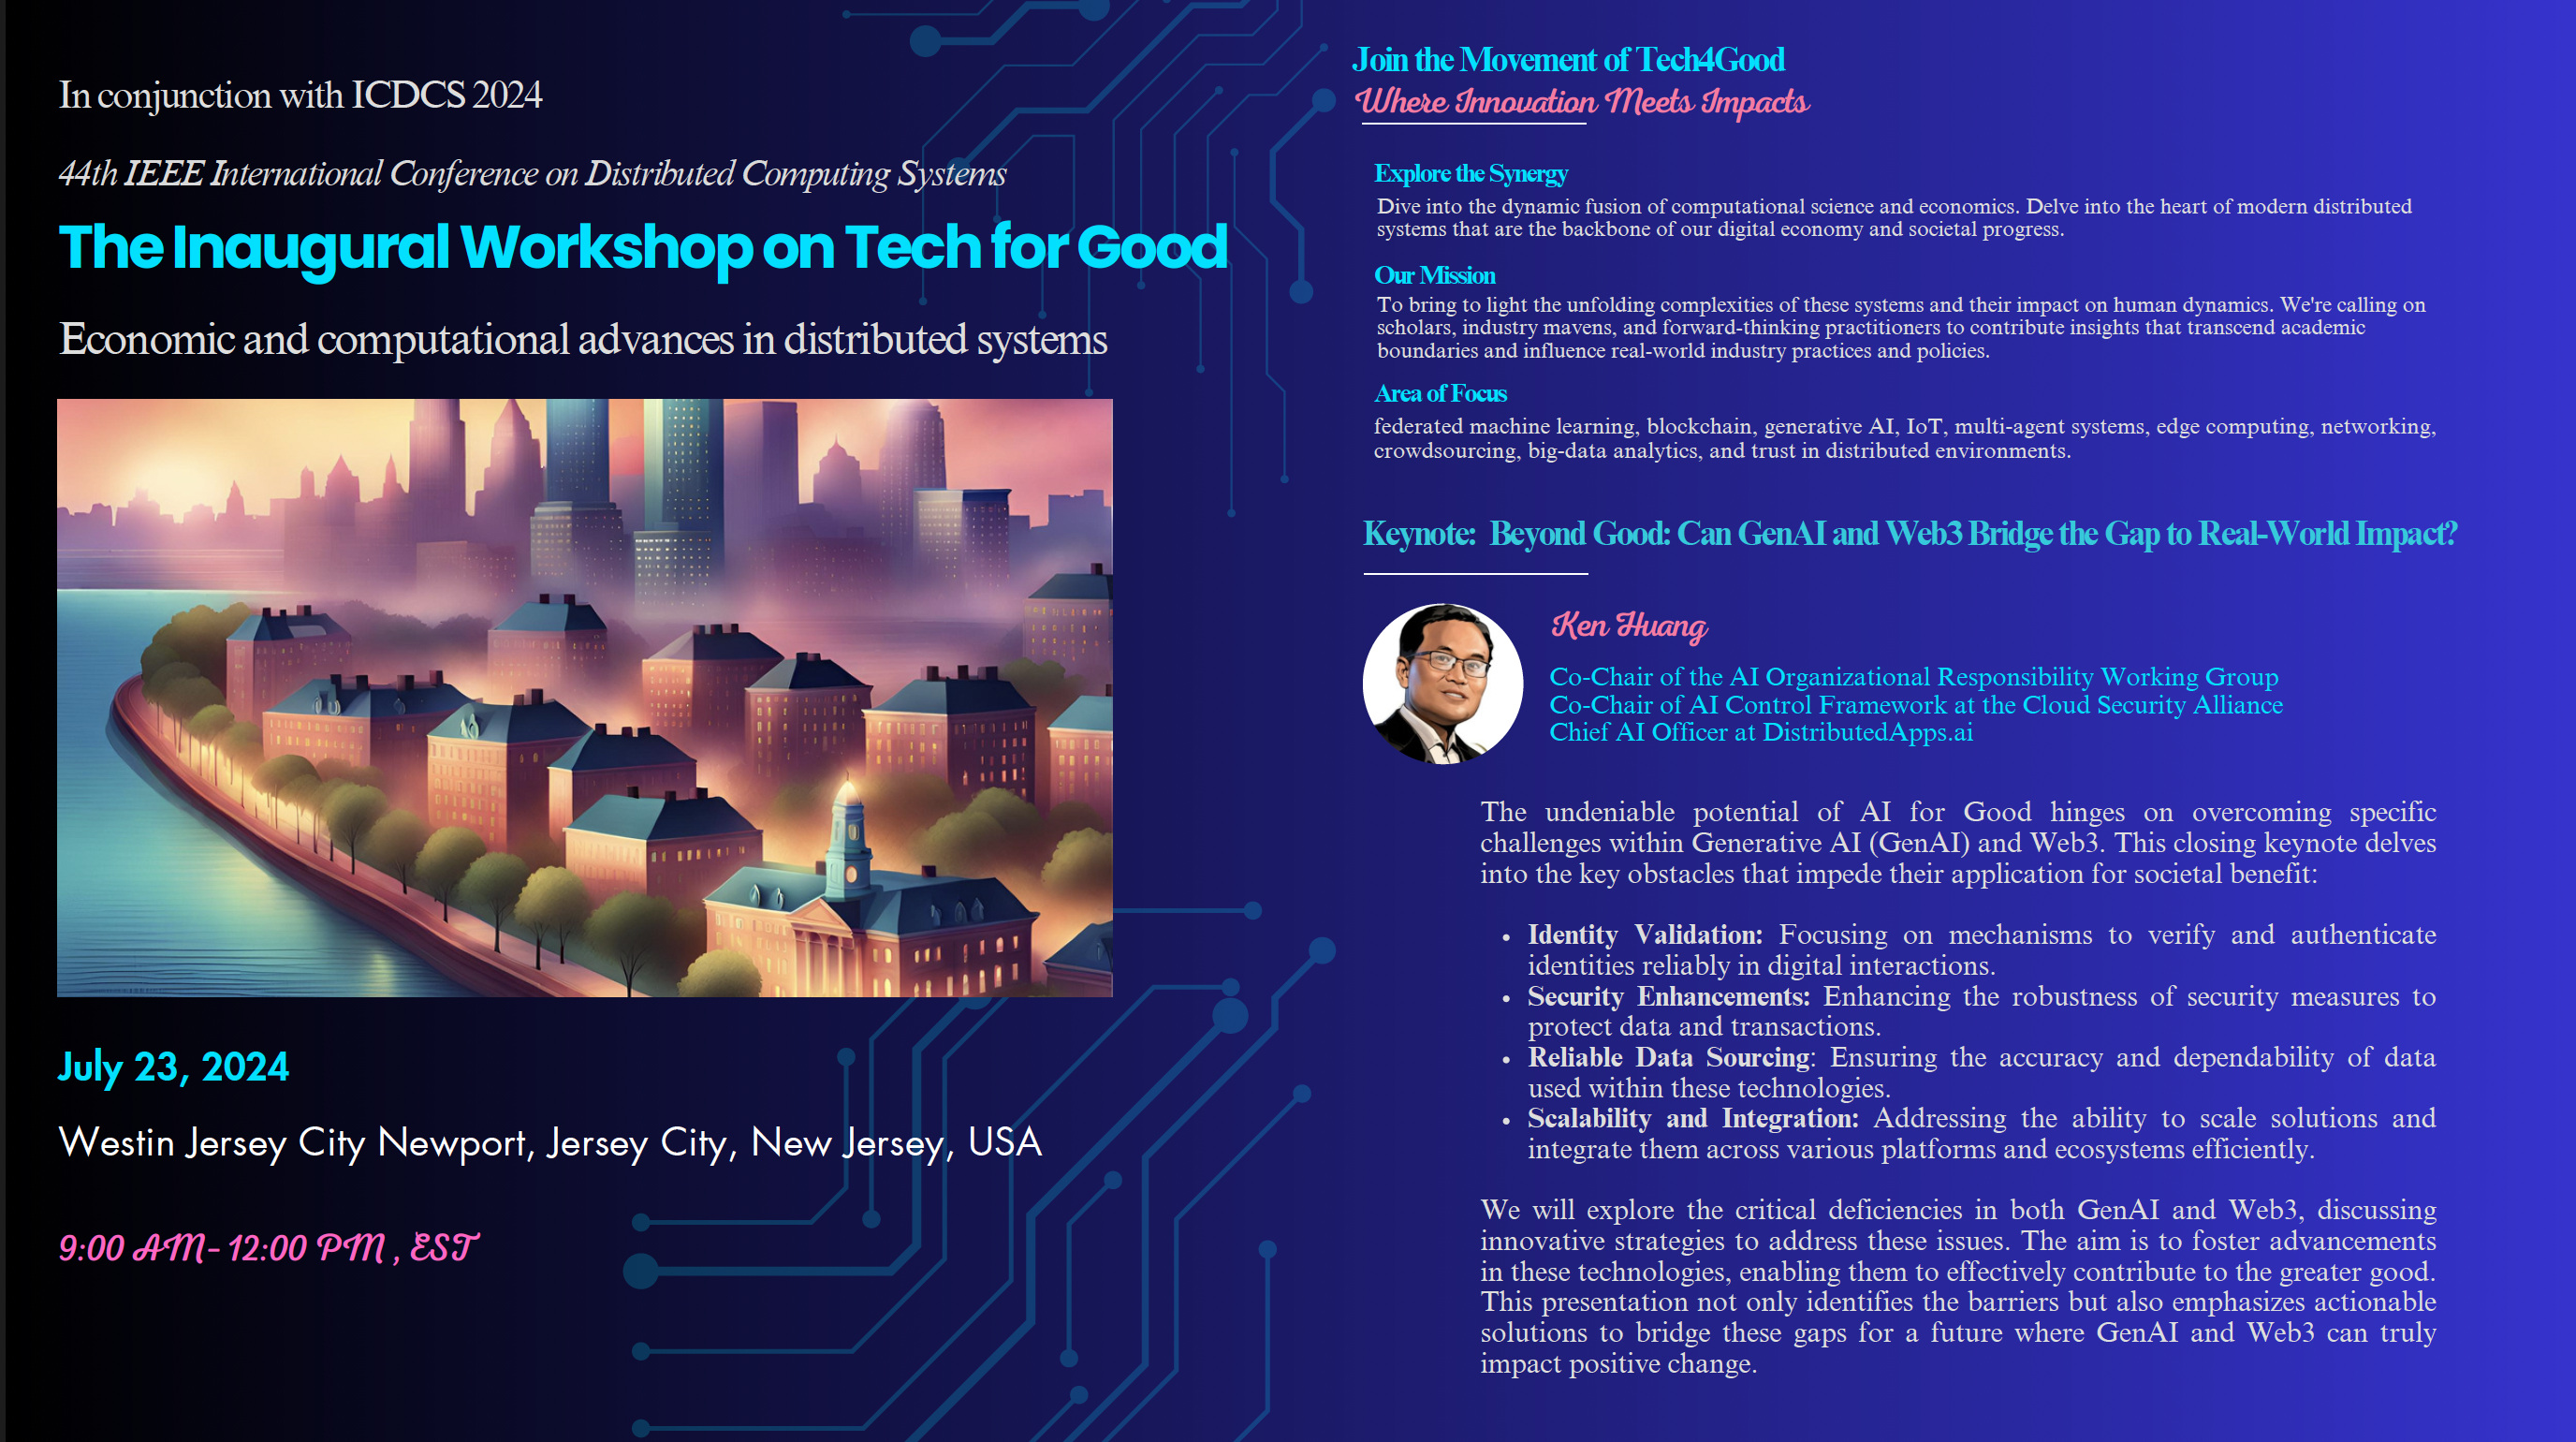 Briefing of The Inaugural workshop on Tech for Good: Economic and Computational Advances in Distributed Systems (Tech4Good)